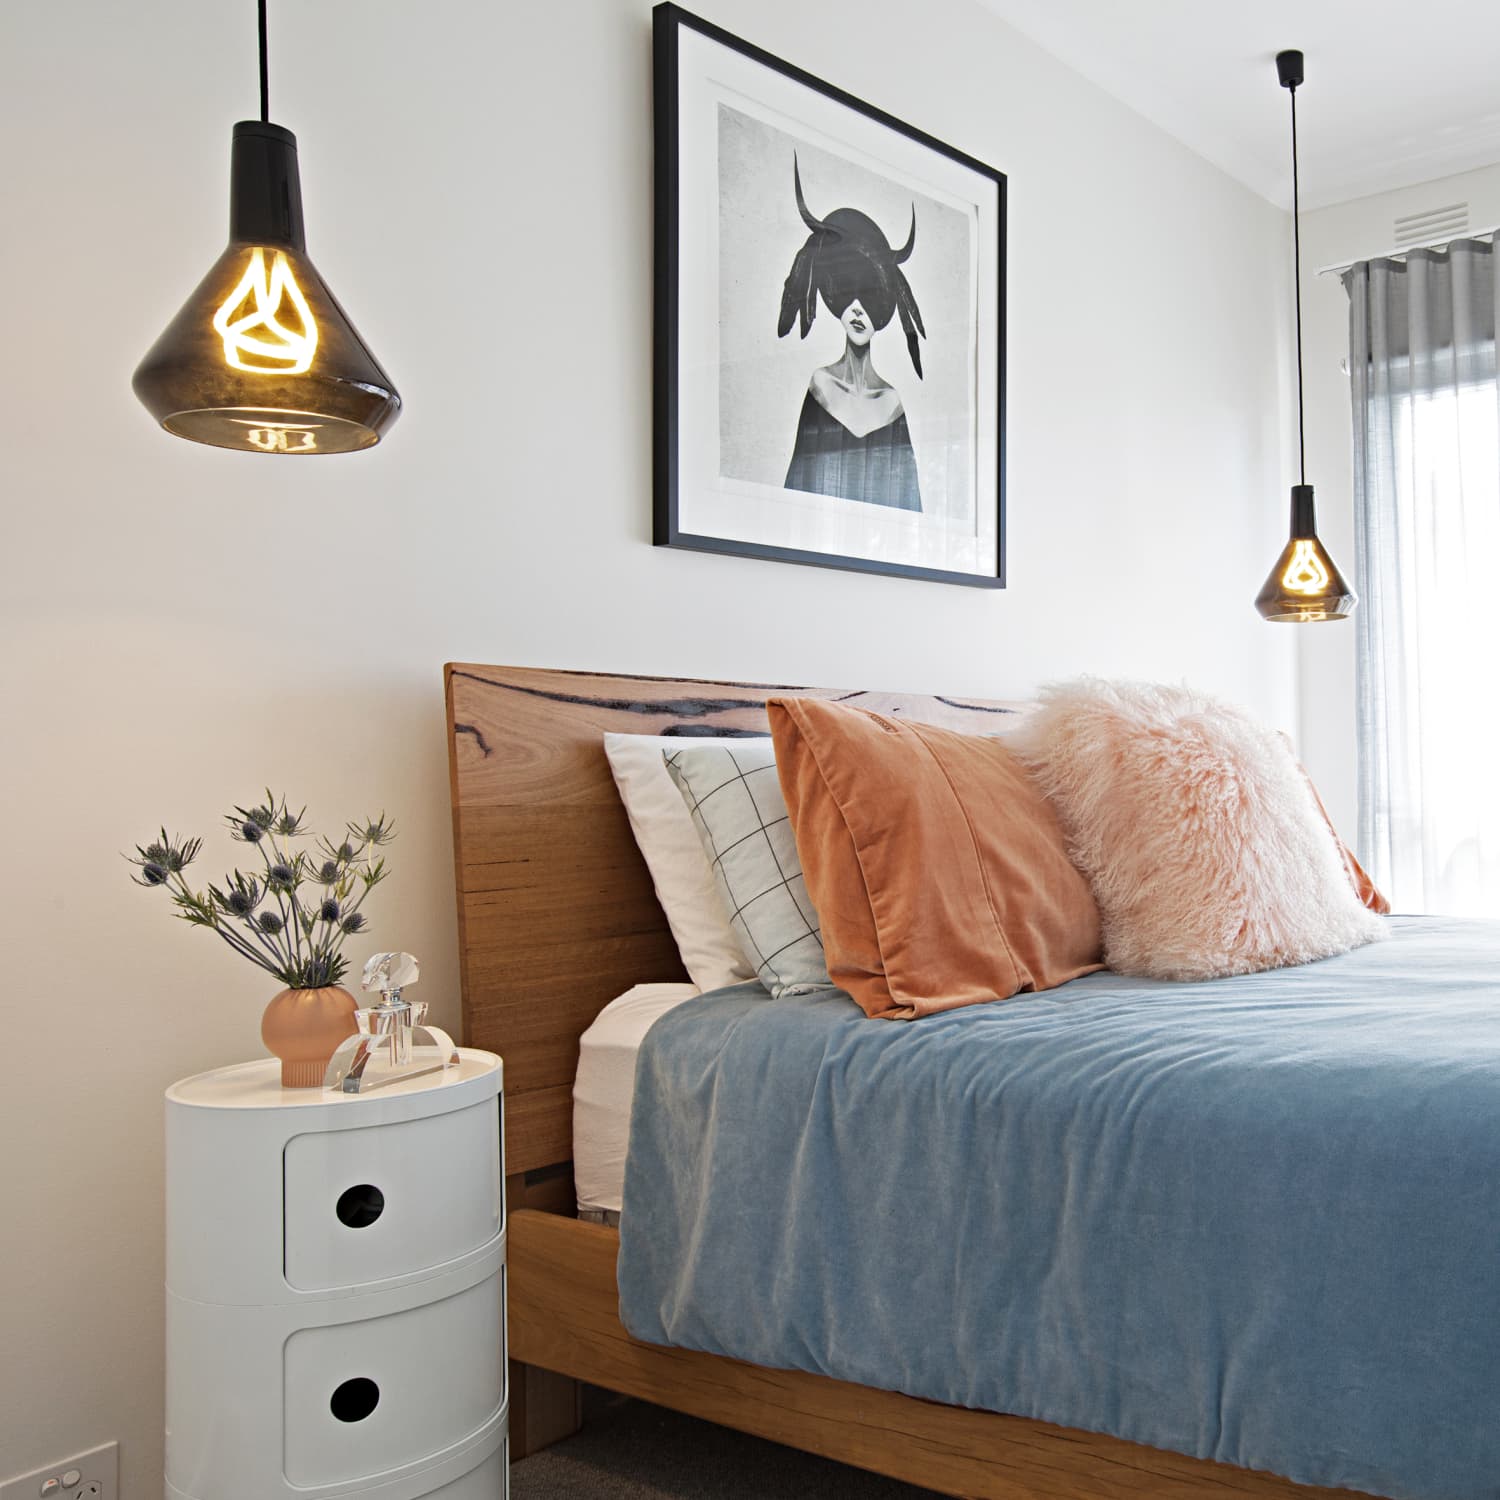 10 pendant lights for bedside - how to use hanging lights in a